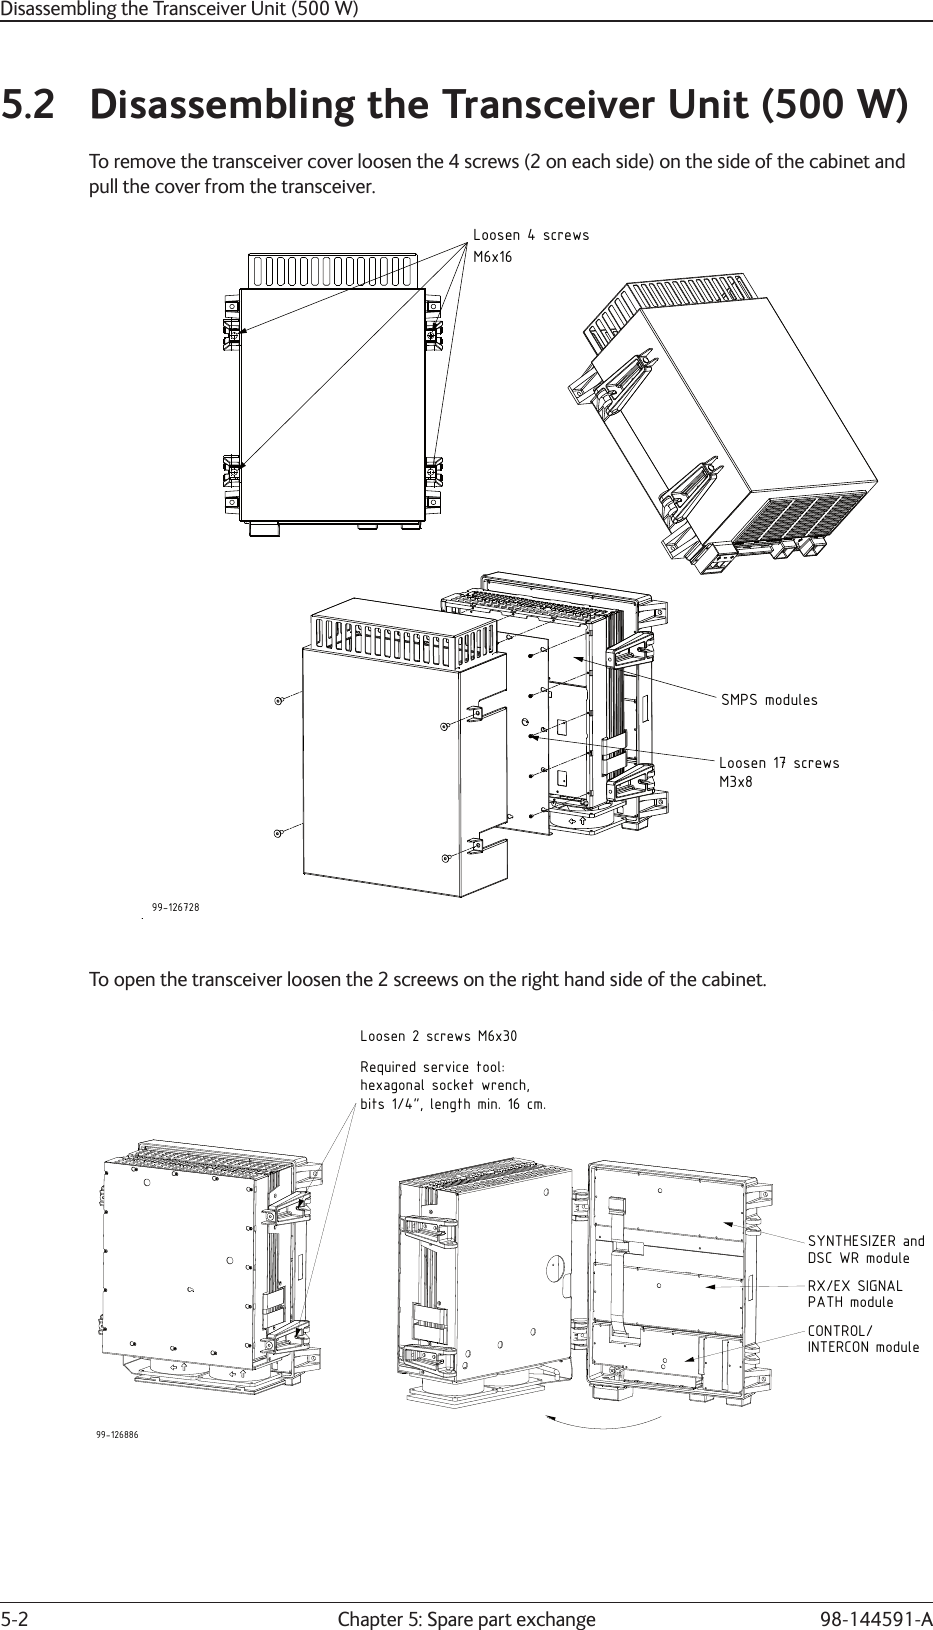 Chapter 5: Spare part exchange5-2 98-144591-A5.2  Disassembling the Transceiver Unit (500 W)To remove the transceiver cover loosen the 4 screws (2 on each side) on the side of the cabinet andpull the cover from the transceiver.99-126728Loosen 4 screwsM6x16SMPS modulesLoosen 17 screwsM3x8To open the transceiver loosen the 2 screews on the right hand side of the cabinet.99-126886SYNTHESIZER andRX/EX SIGNALCONTROL/Loosen 2 screws M6x30DSC WR modulePATH moduleINTERCON moduleRequired service tool:hexagonal socket wrench,bits 1/4&quot;, length min. 16 cm.Disassembling the Transceiver Unit (500 W)